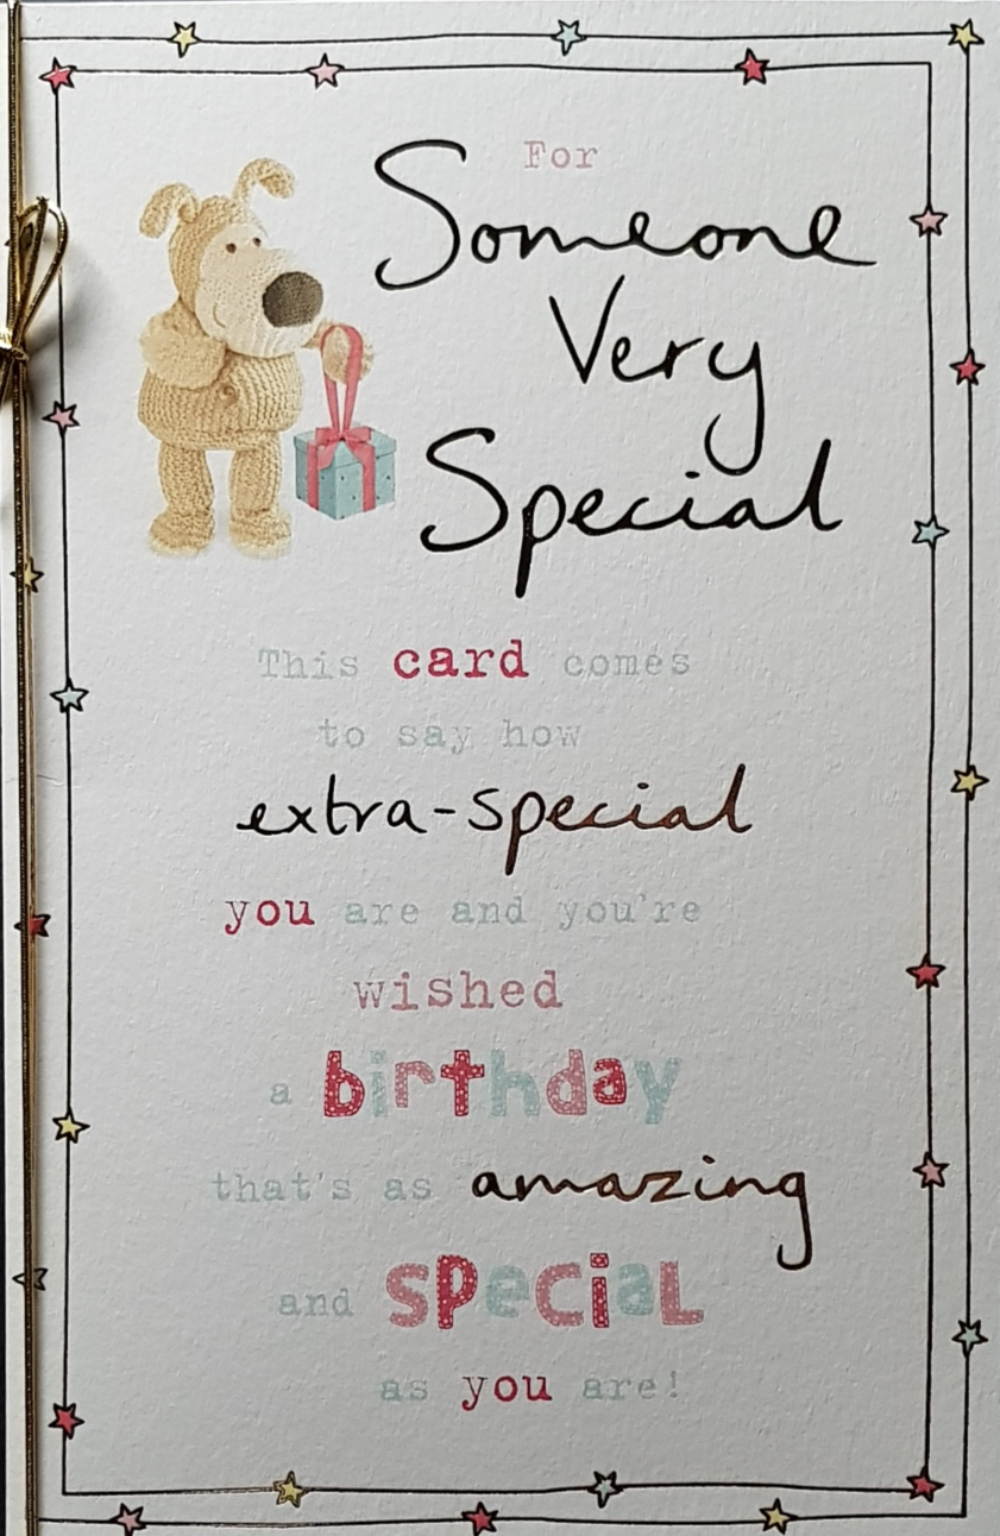 Birthday Card - Someone Very Special / This Card Comes To Say How Extra-Special You Are